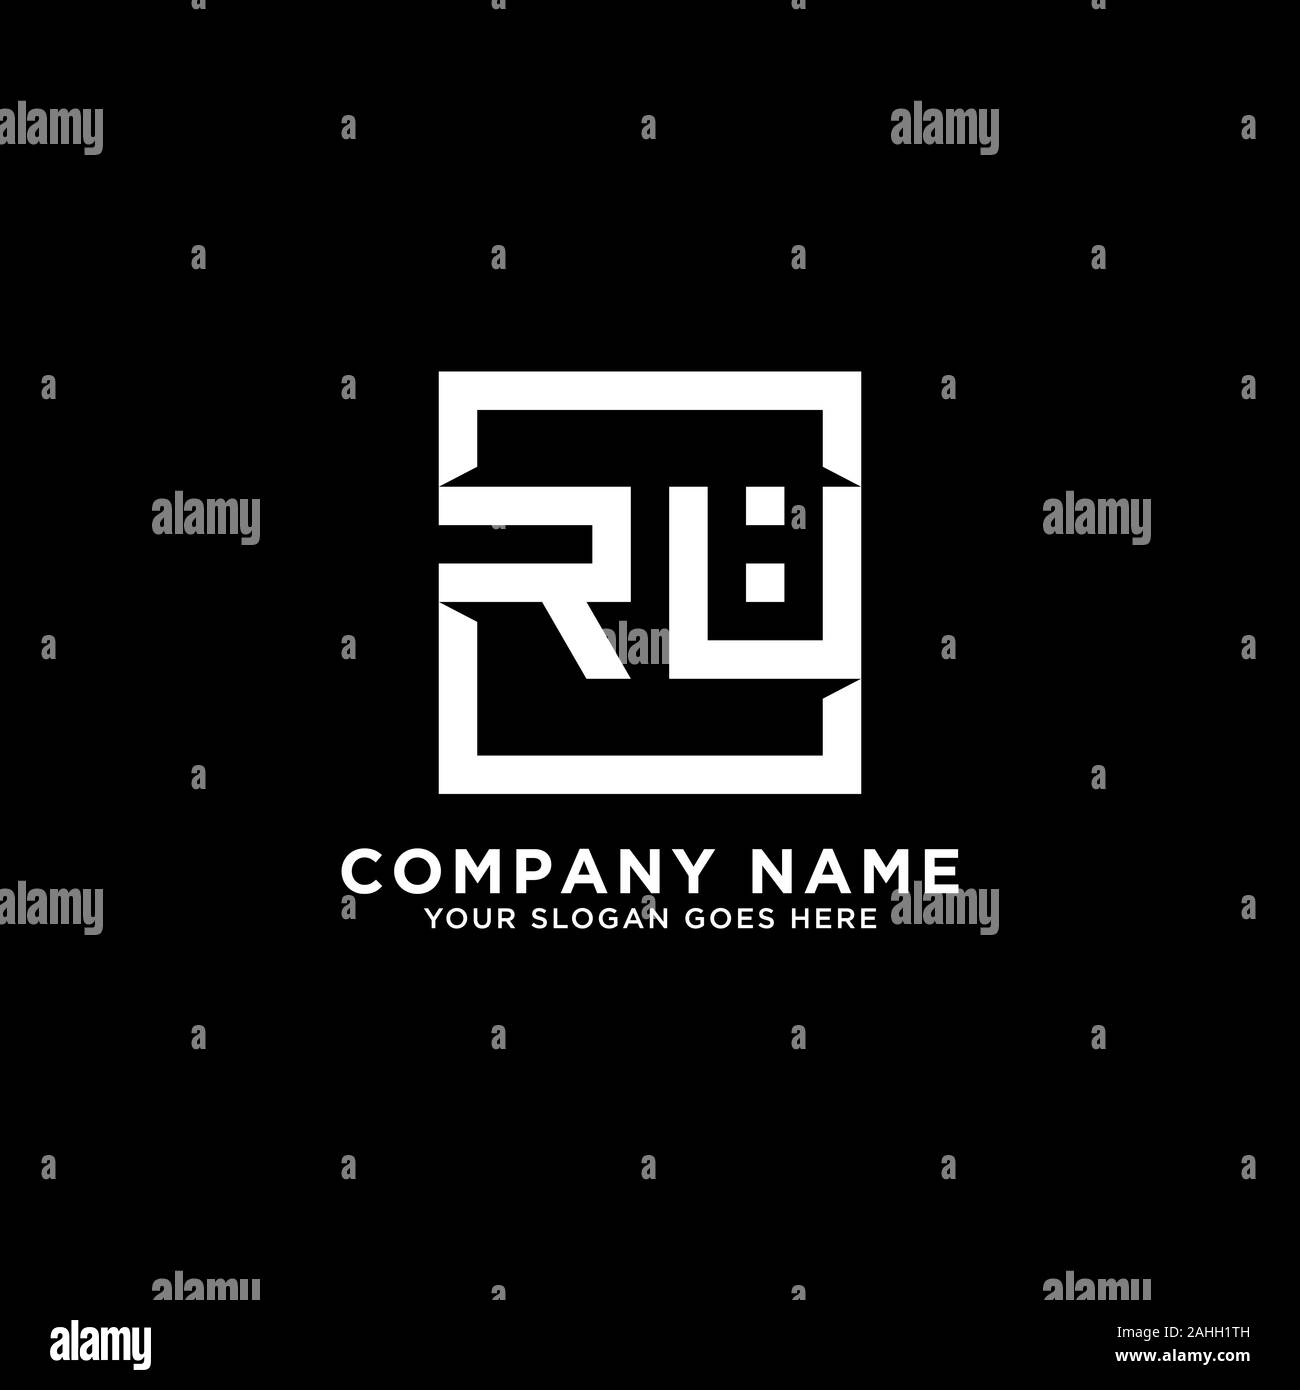 R AND U initial logo inspirations, square logo template, clean and clever logo vector Stock Vector